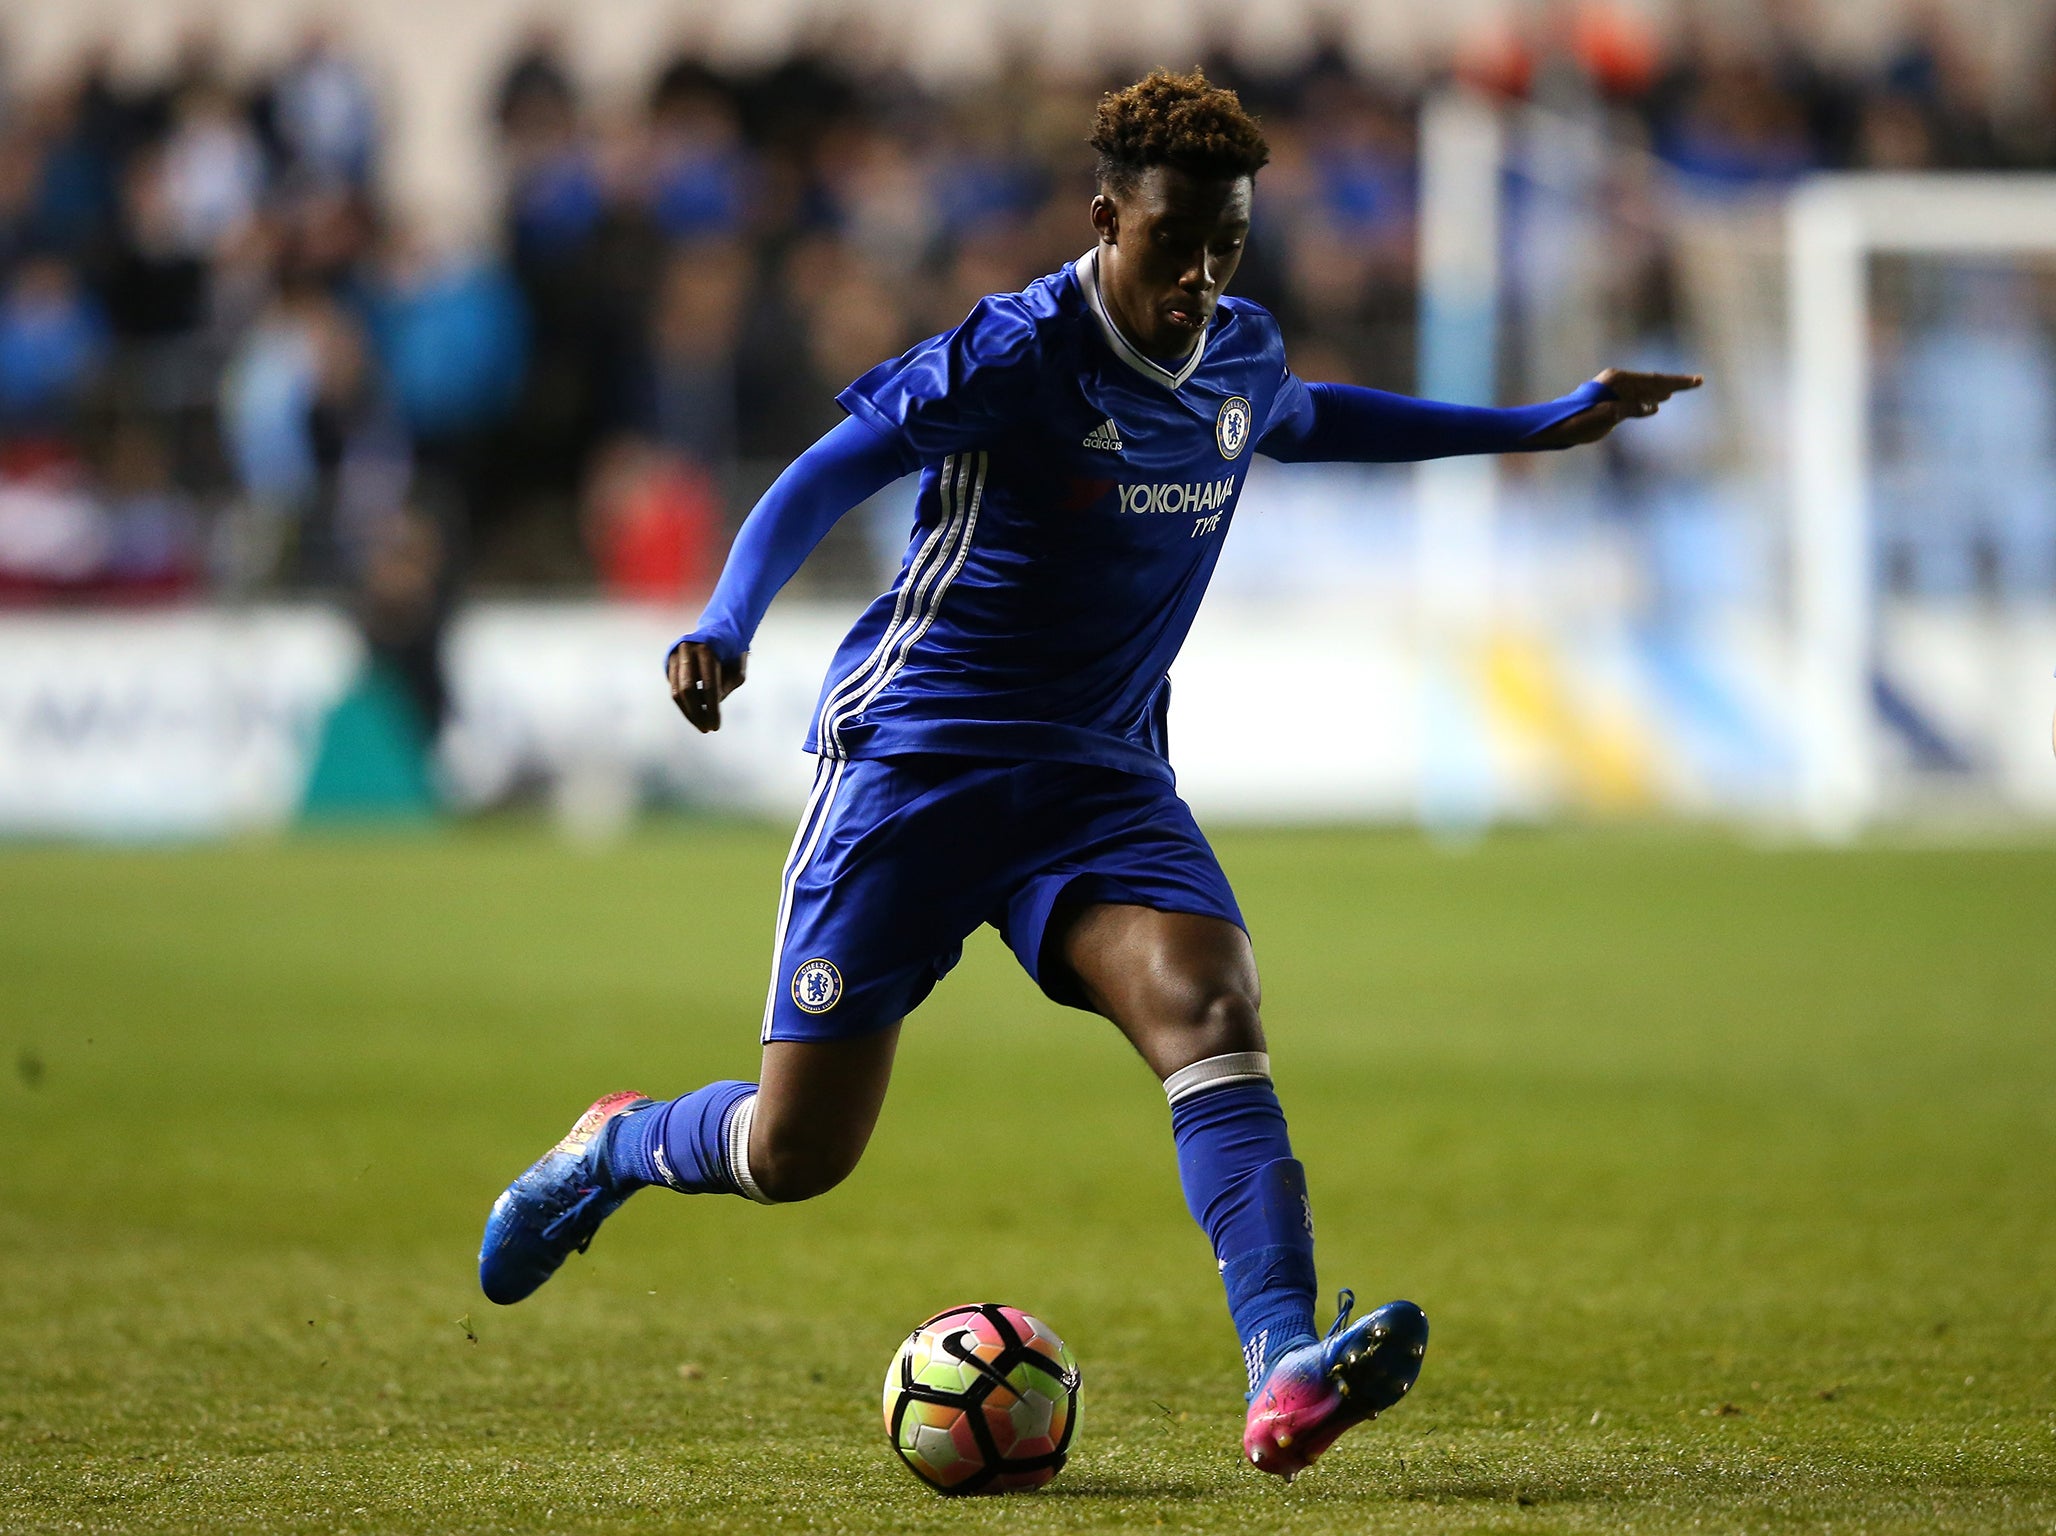 The Chelsea midfielder is also an England U17 star